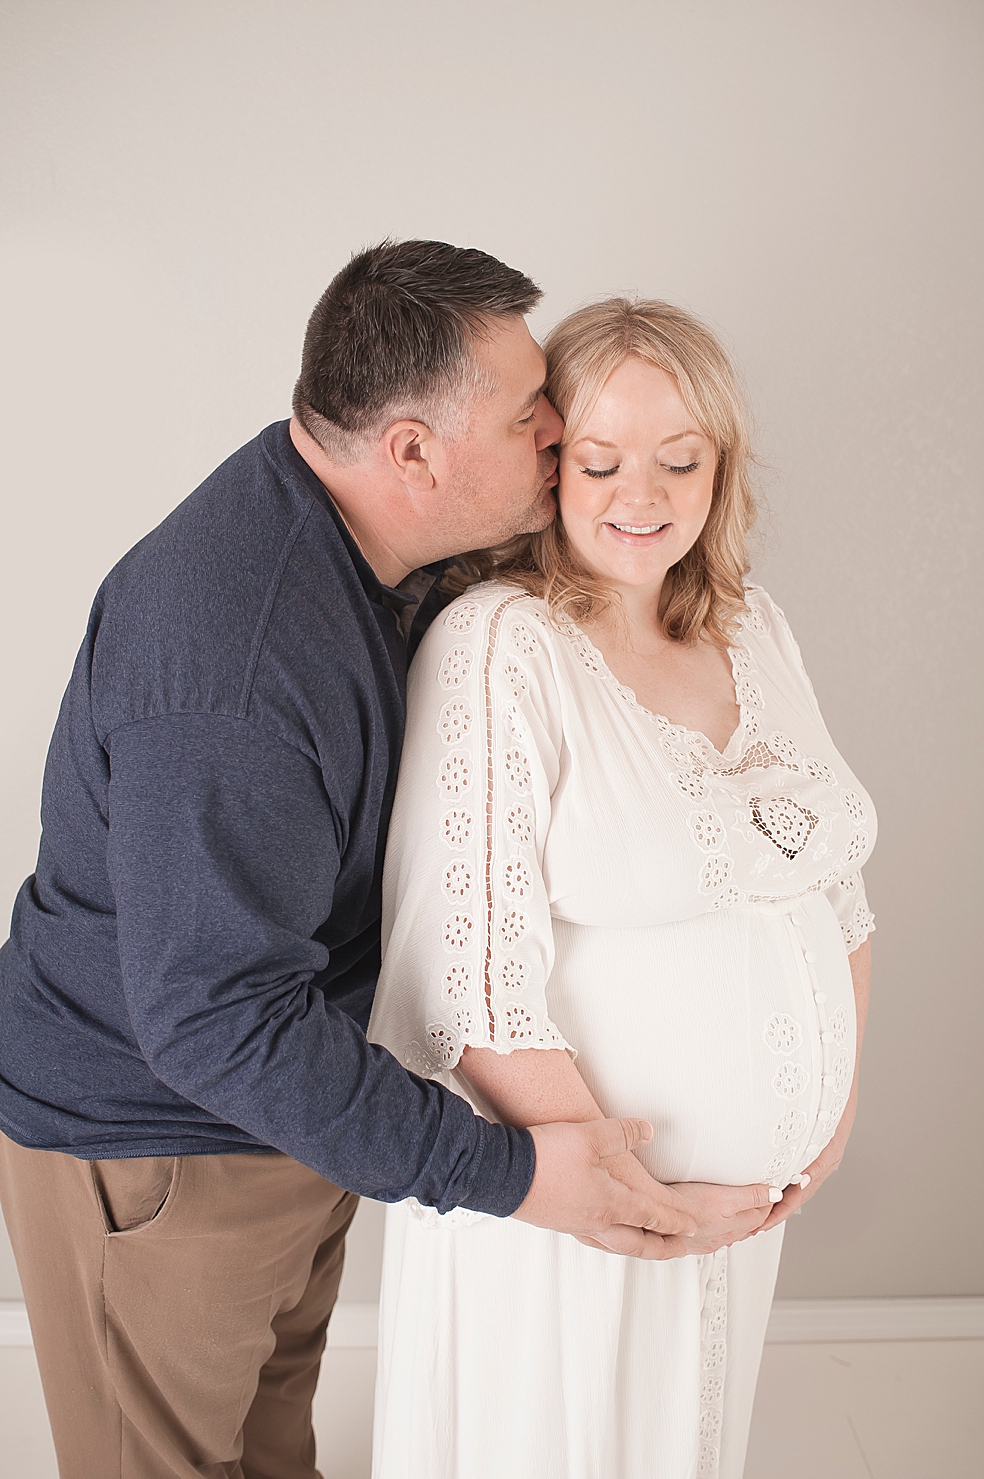 Dad kissing mom to be on the forehead | Photo by Decatur Alabama Maternity Photographer Jessica Lee